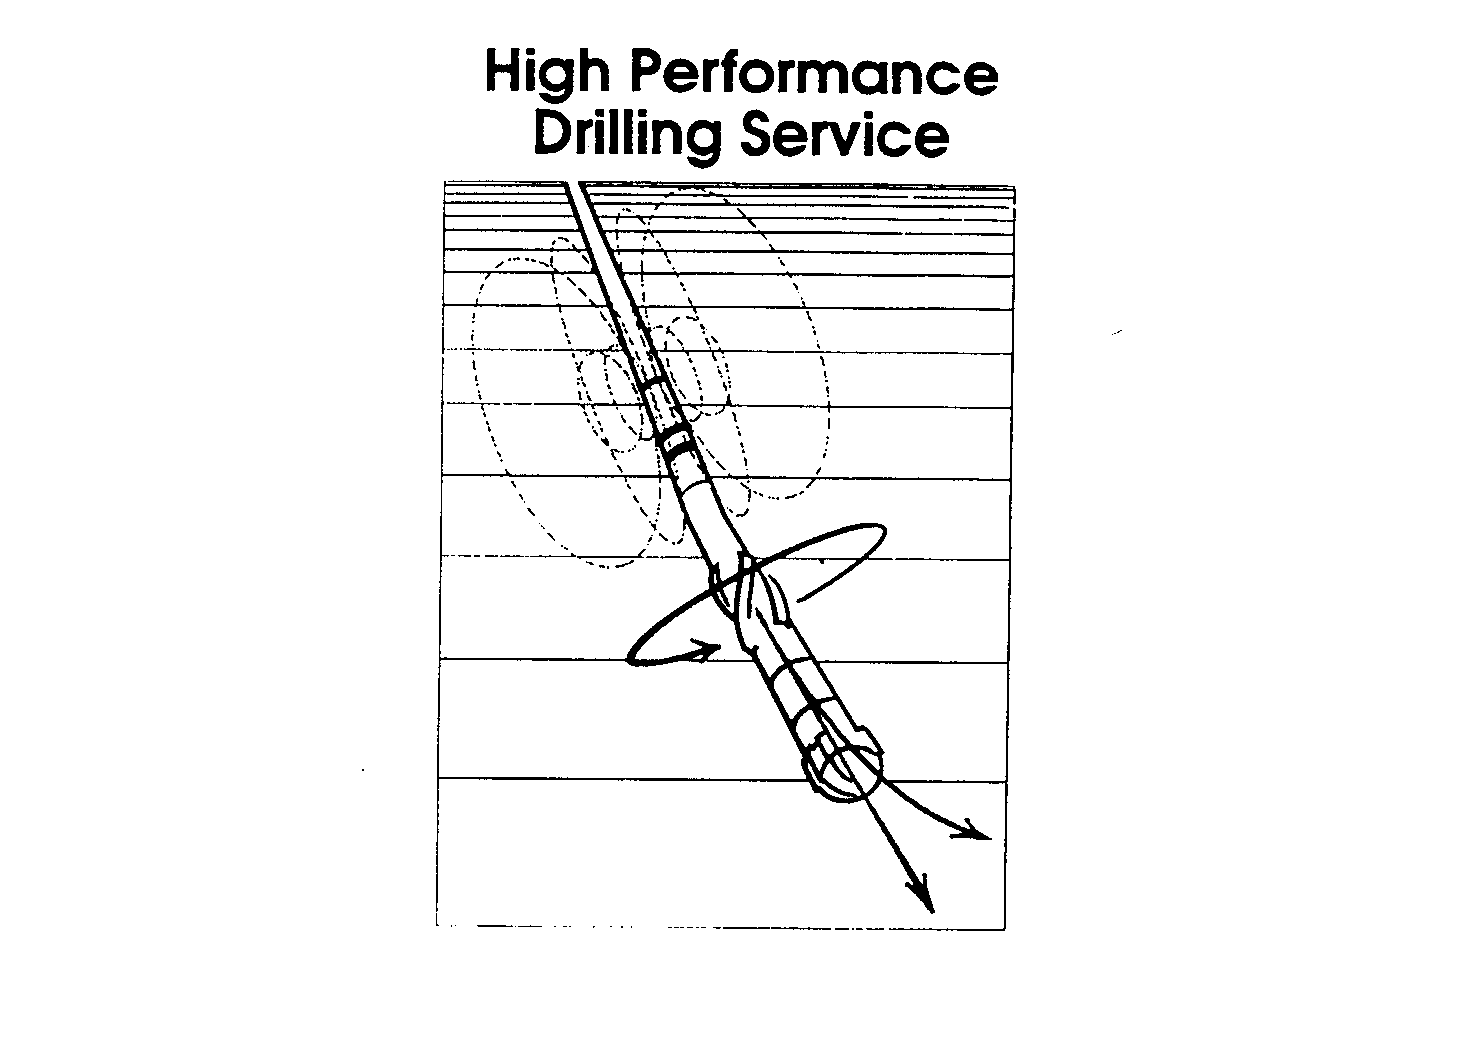  HIGH PERFORMANCE DRILLING SERVICE